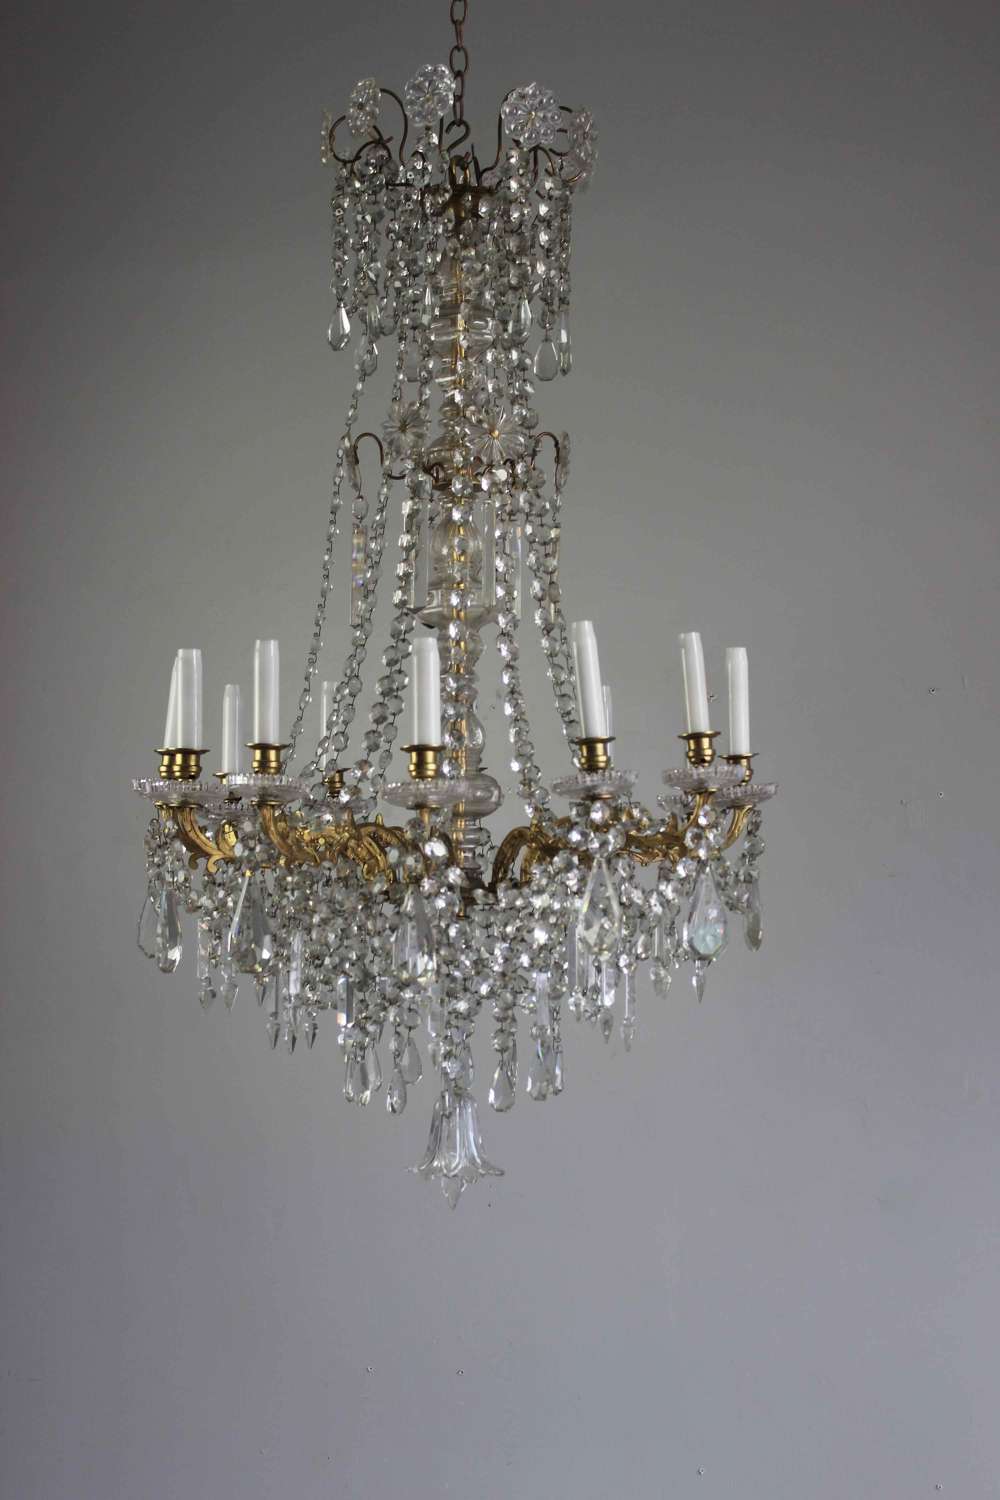 Classical Napoleon 111 style Baccarat chandelier circa 1860